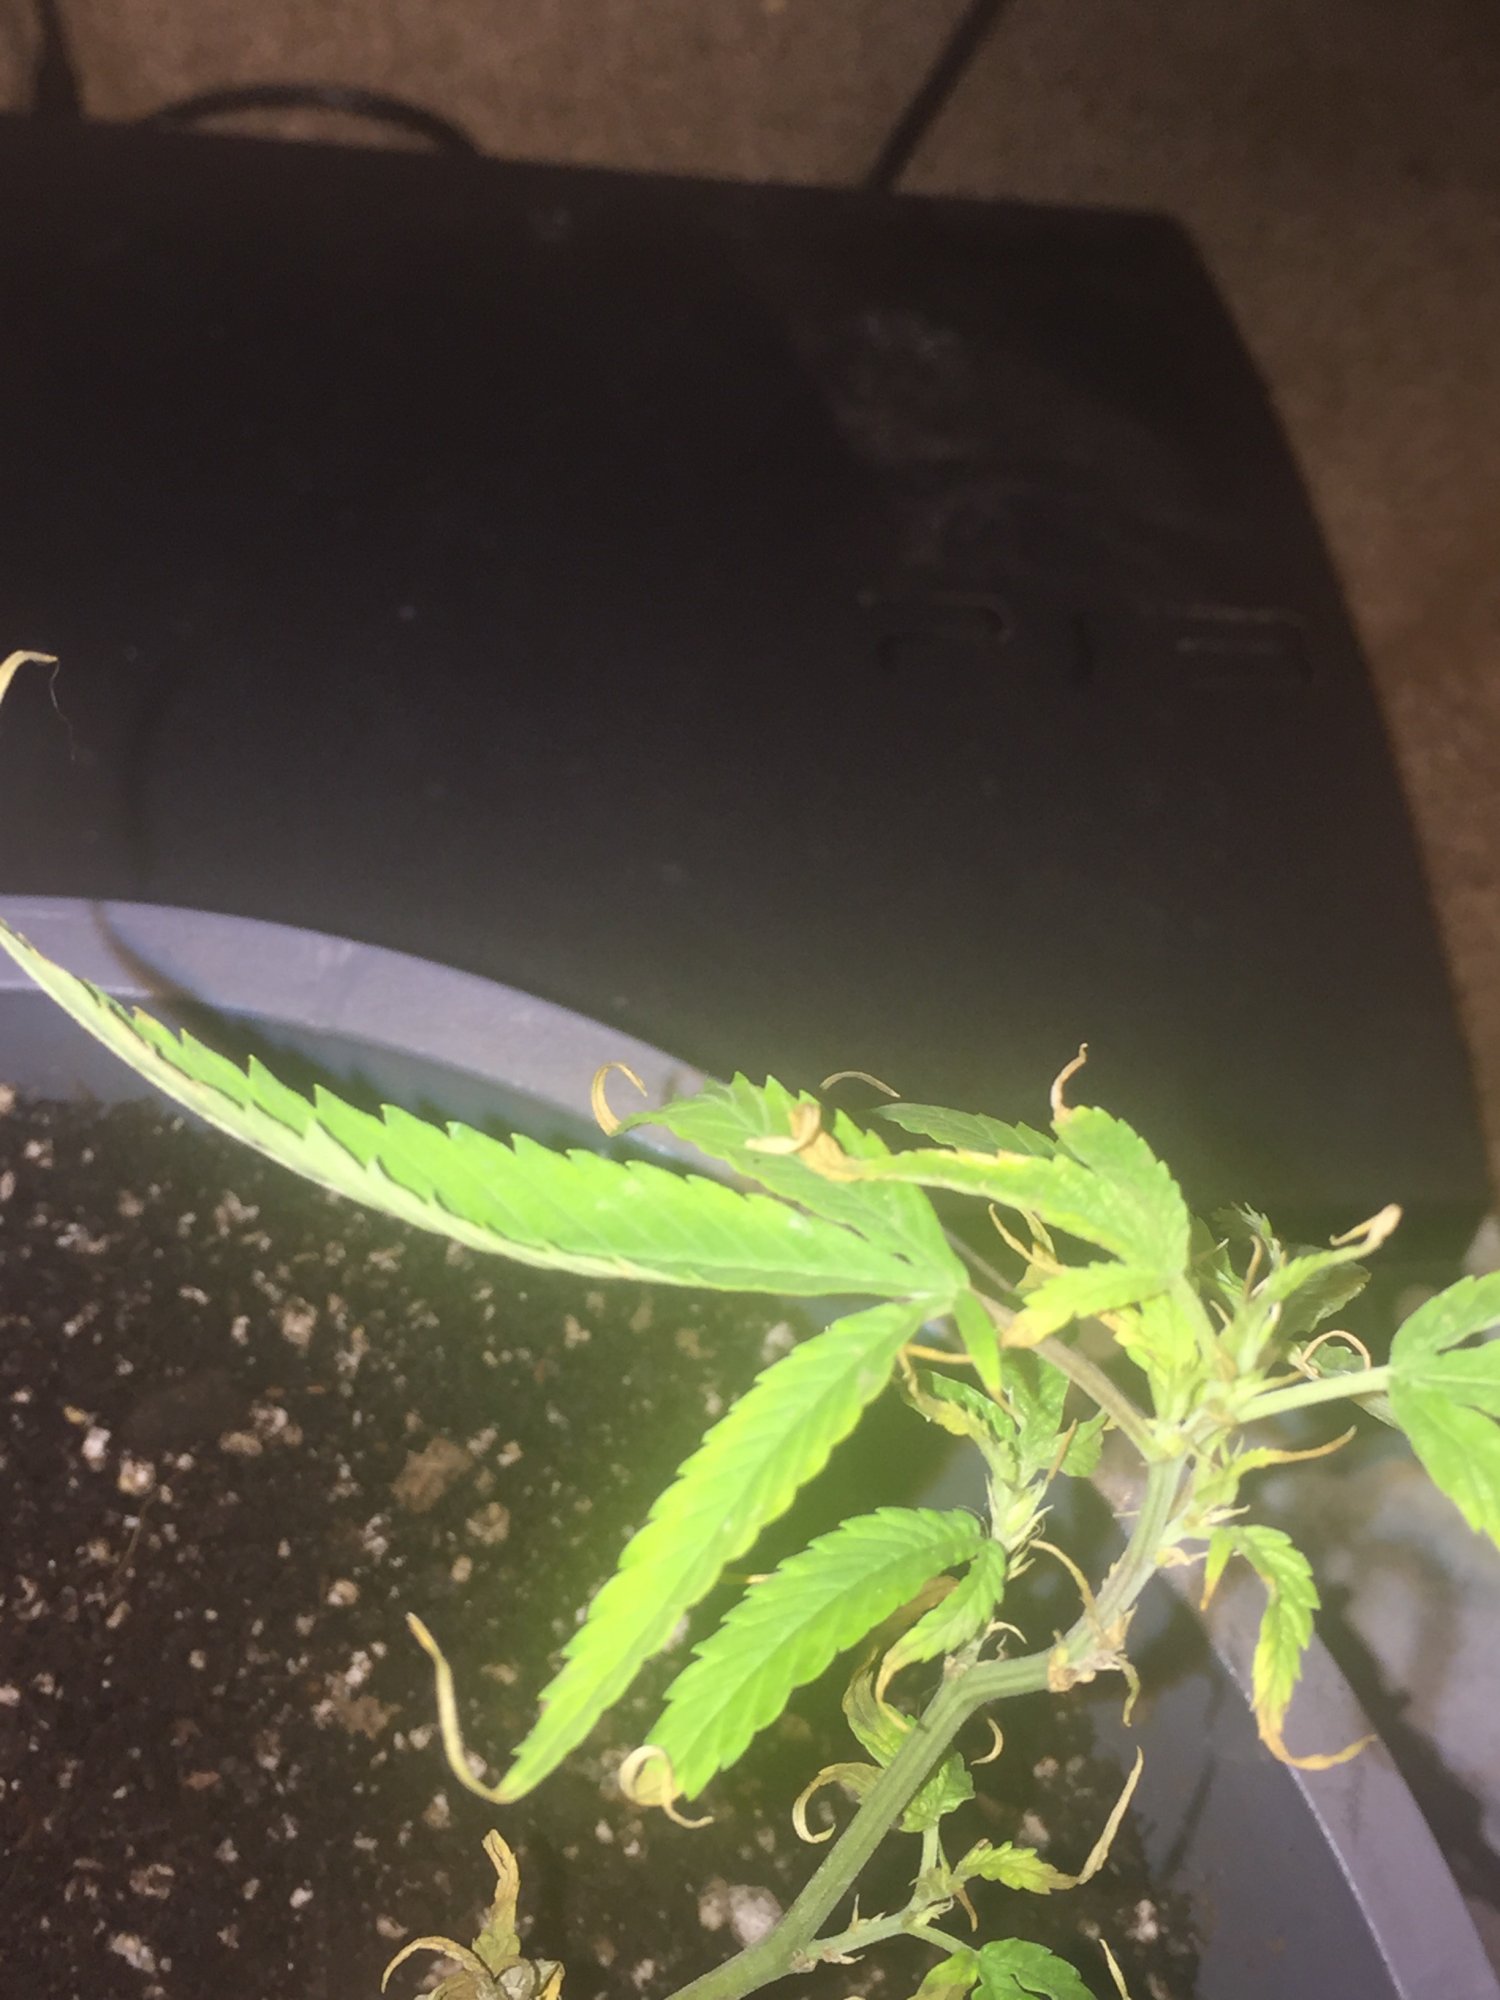 Update on my clones that i still need help with 4